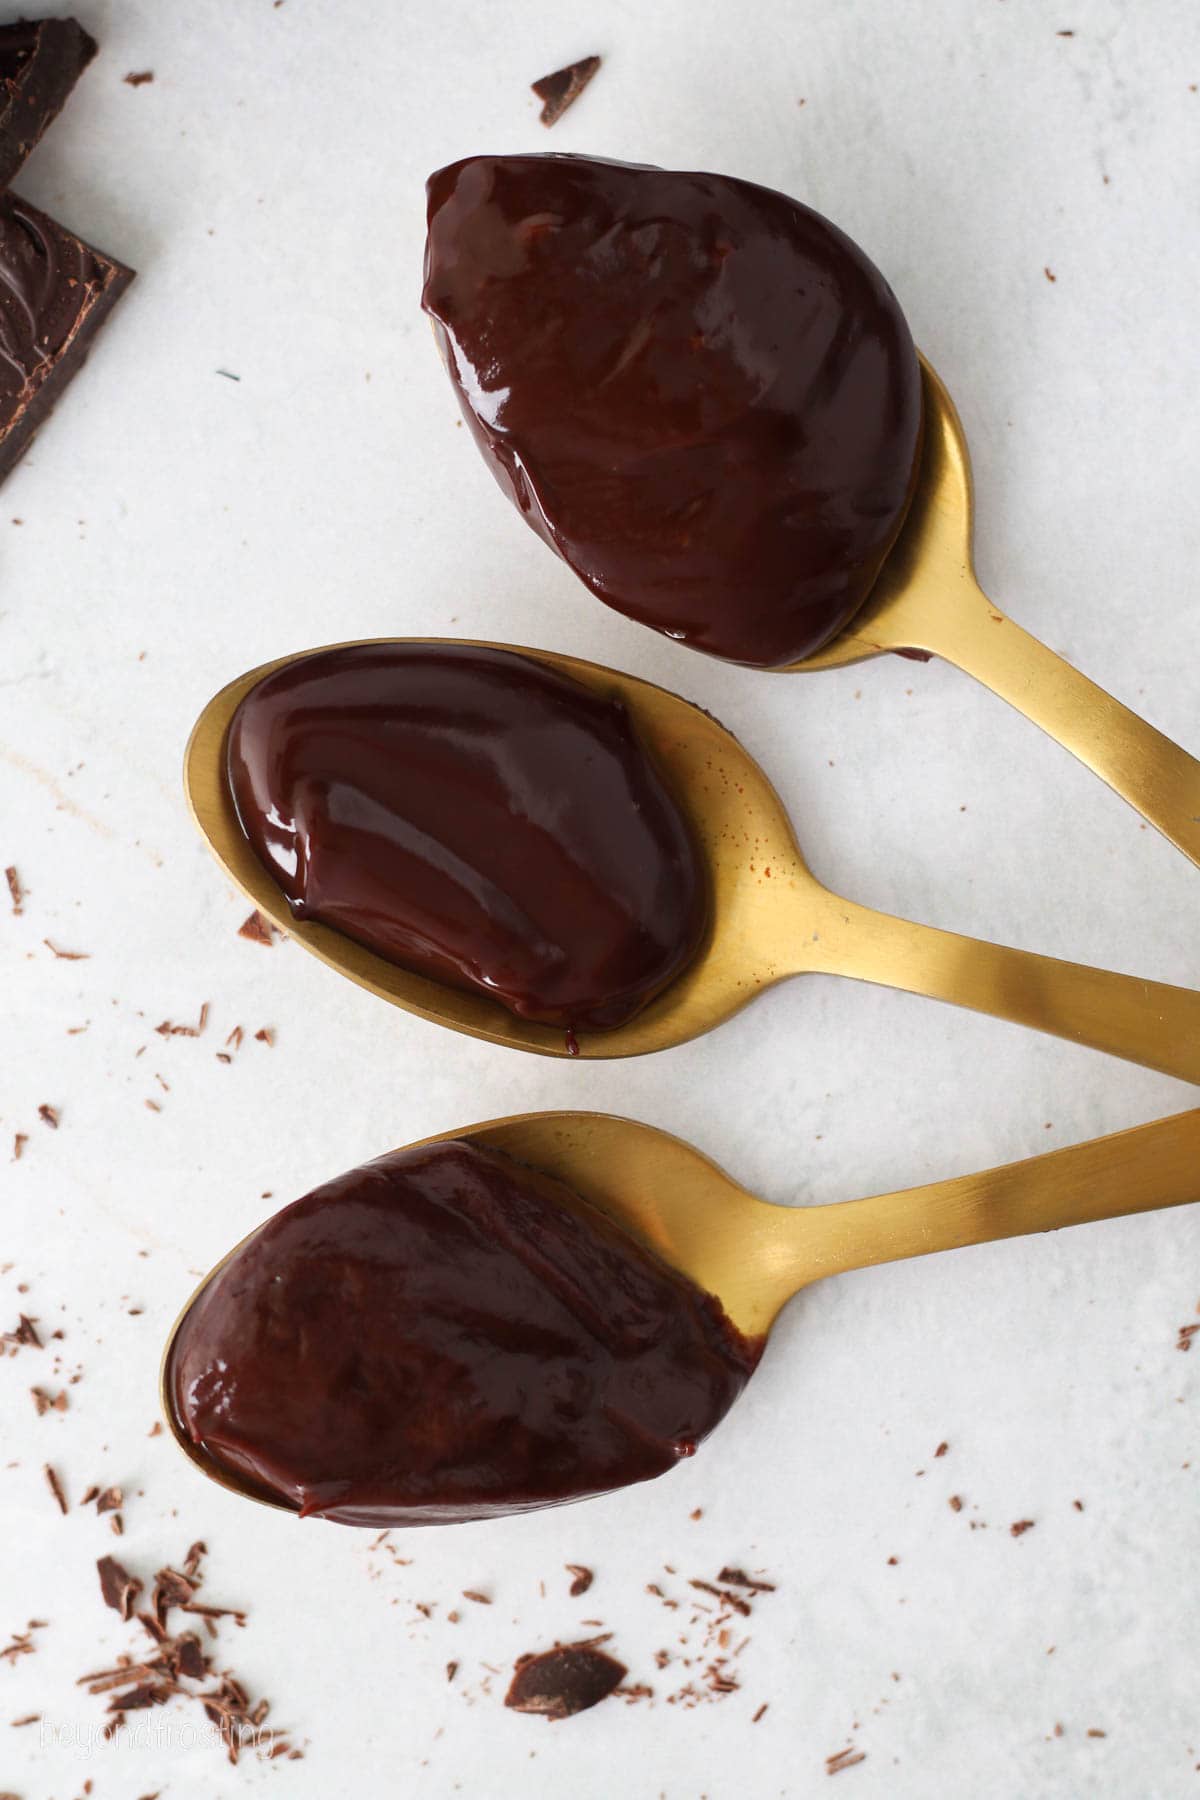 Overhead view of three spoonfuls of chocolate ganache on a white countertop.